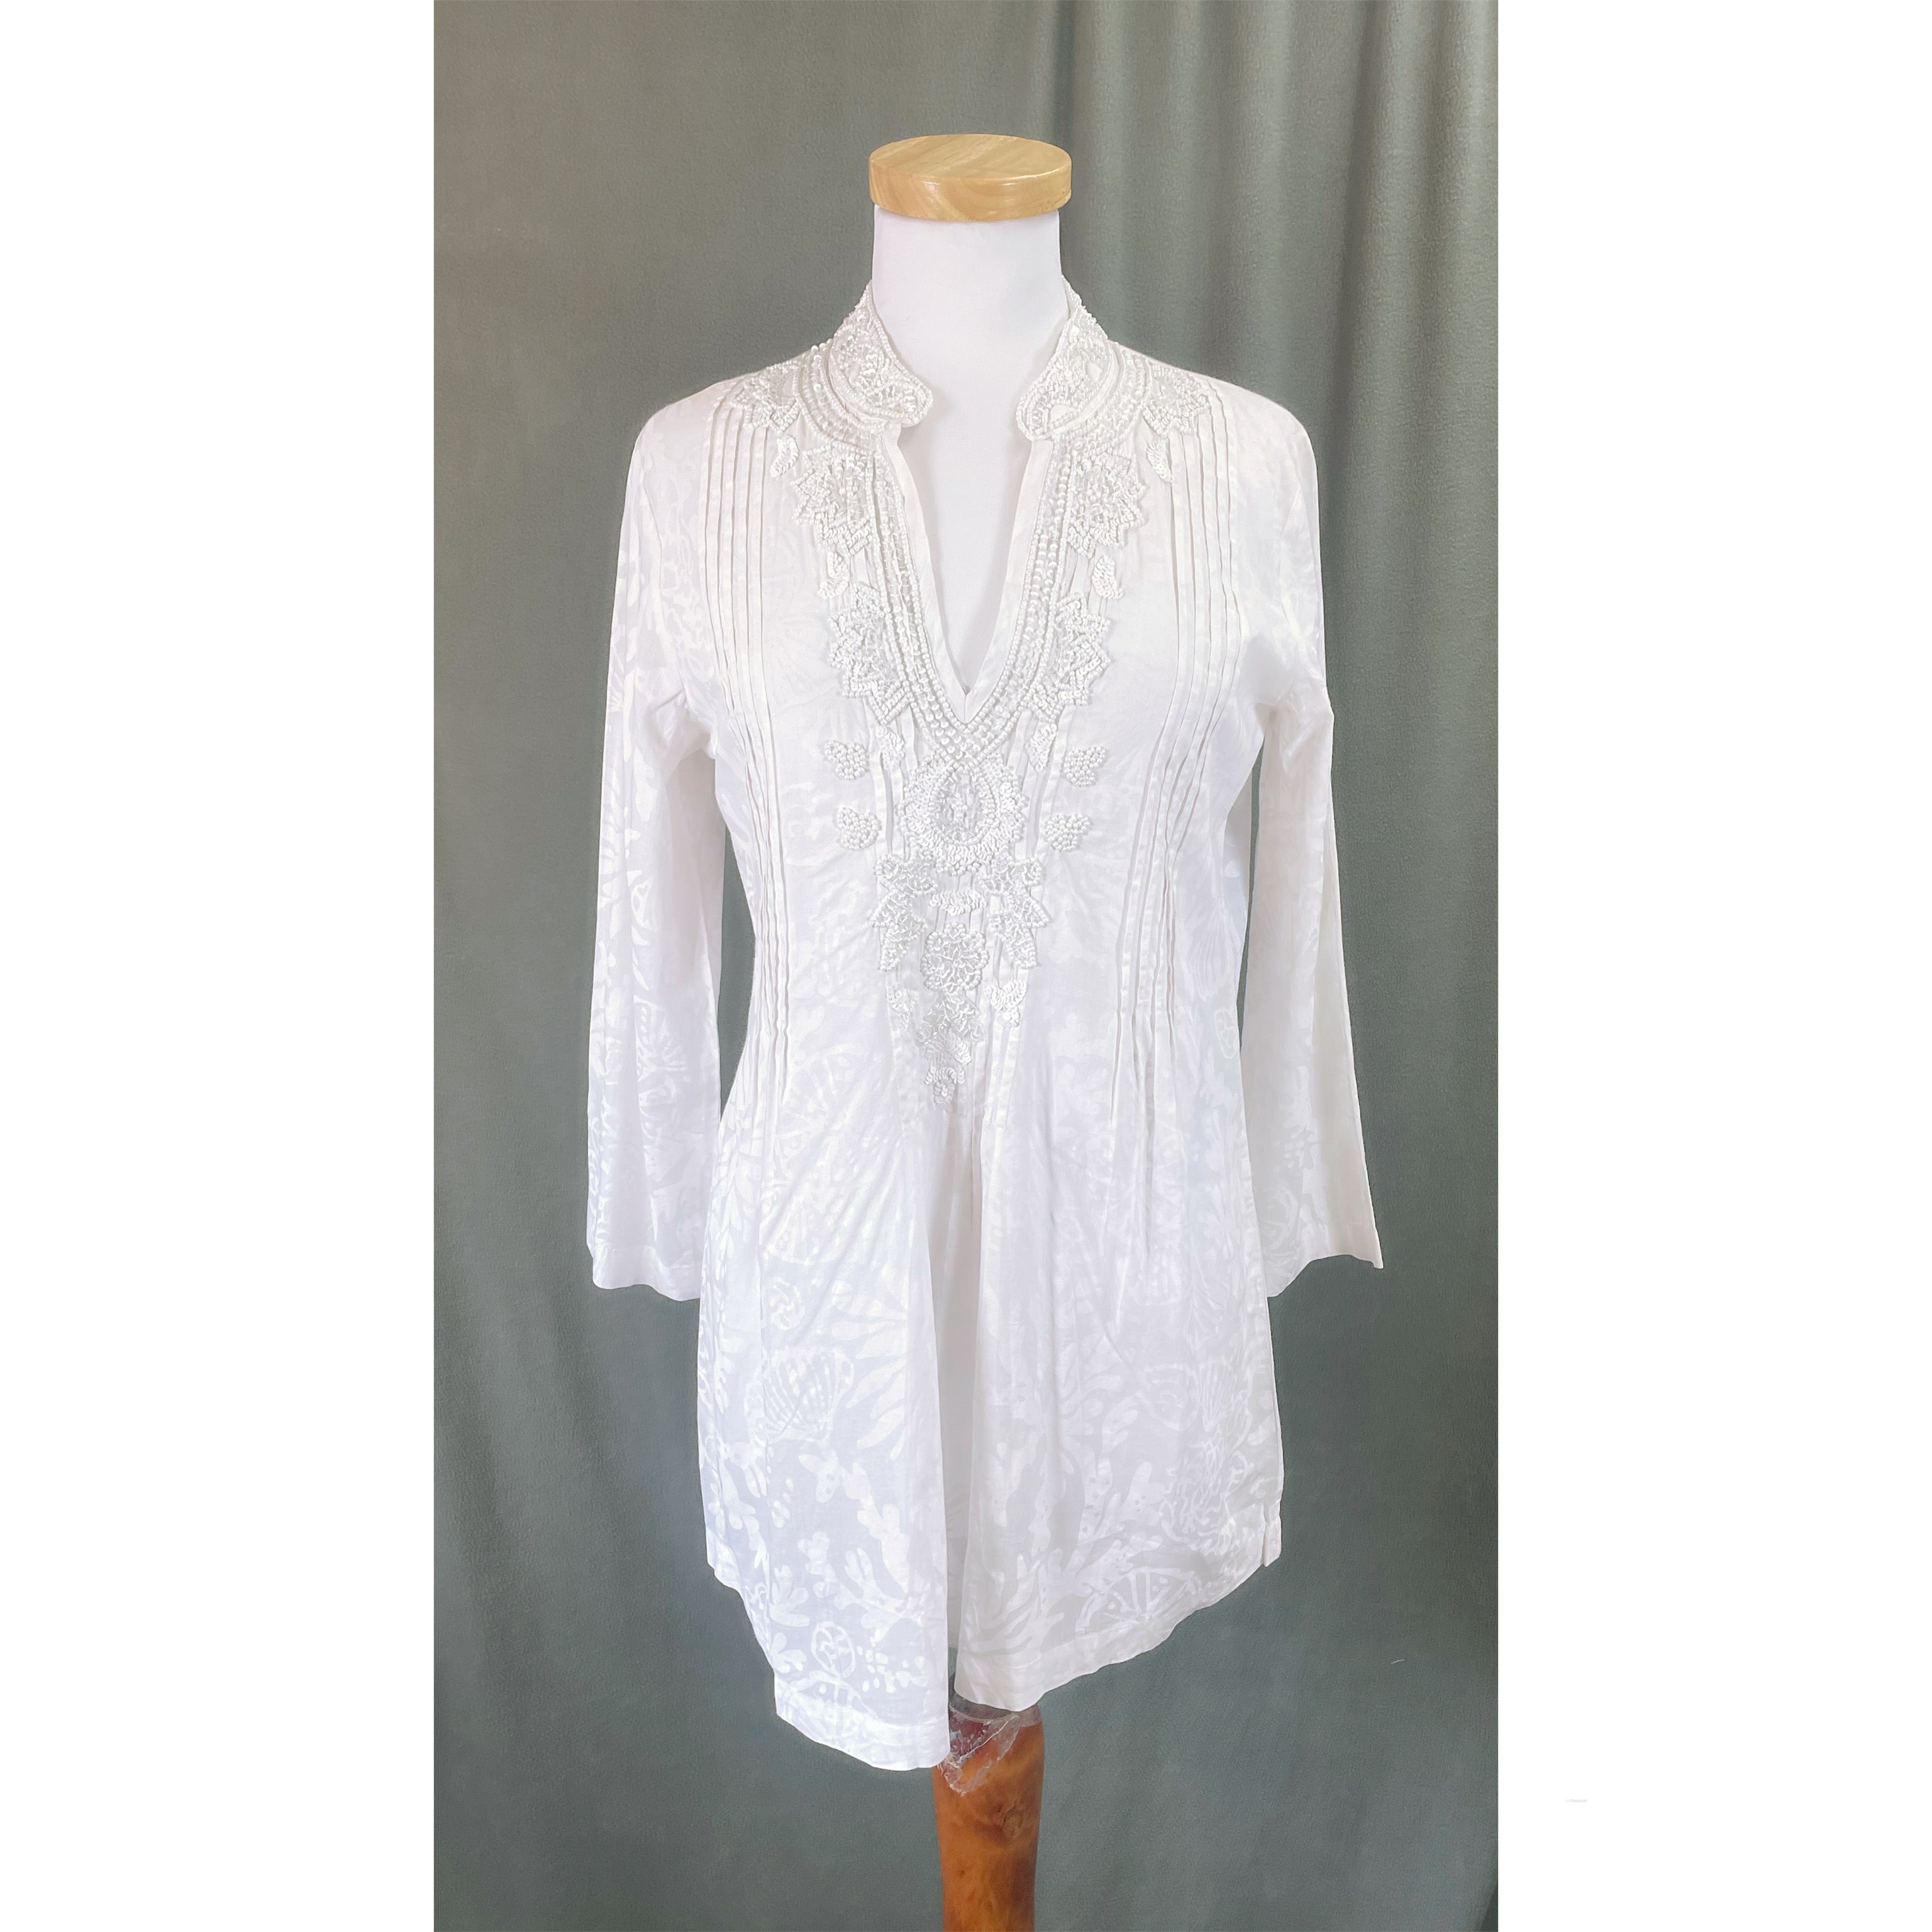 Lilly Pulitzer white beaded Sarasota tunic, size S, NEW WITH TAGS!